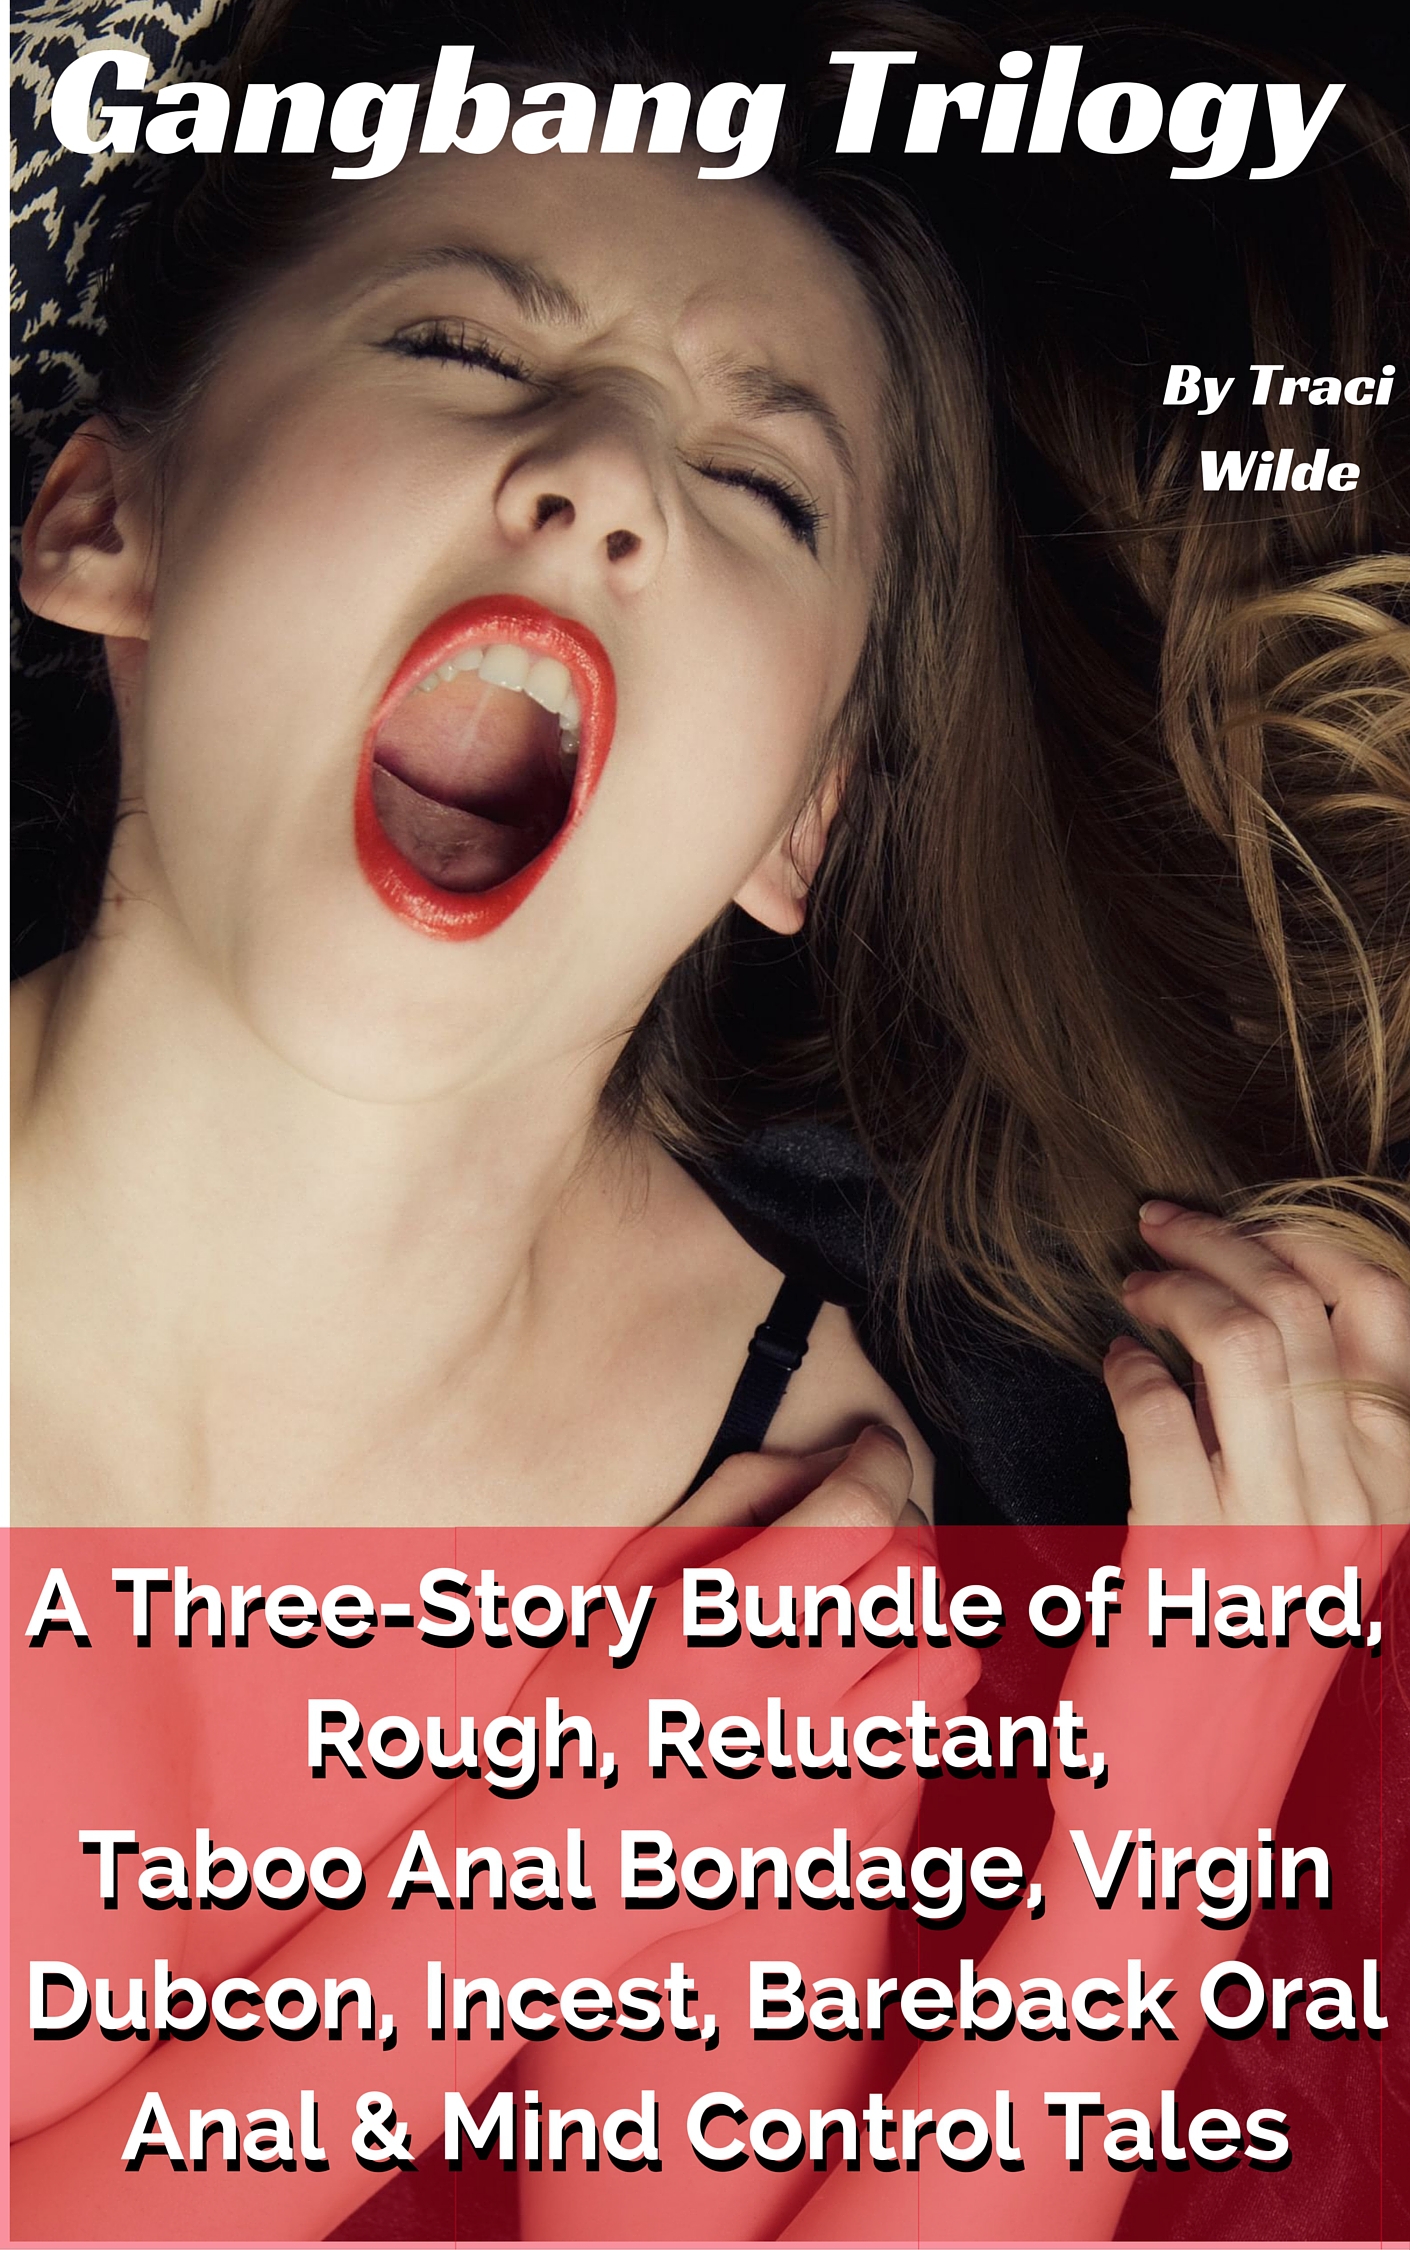 Smashwords – Birthday Gangbang Trilogy A Three-Story Bundle of Hard, Rough, Reluctant, Taboo Anal Bondage, Virgin Dubcon, Incest, Bareback Oral Anal and Mind Control Tales – a book by Traci Wilde